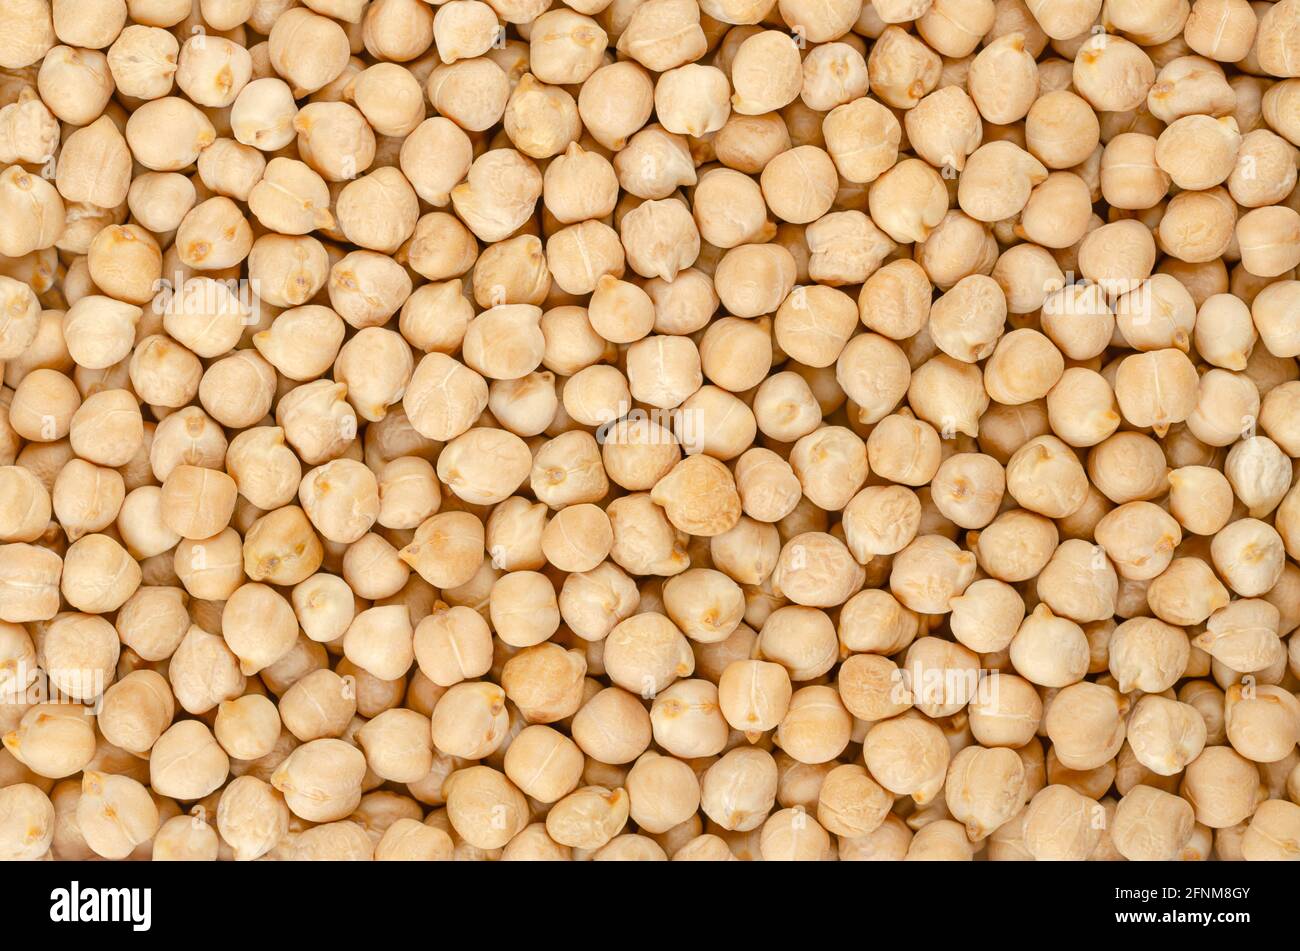 Dried chickpeas, background from above. Whole and light tanned chick peas, a high in protein legume and fruit of Cicer arietinum. Stock Photo